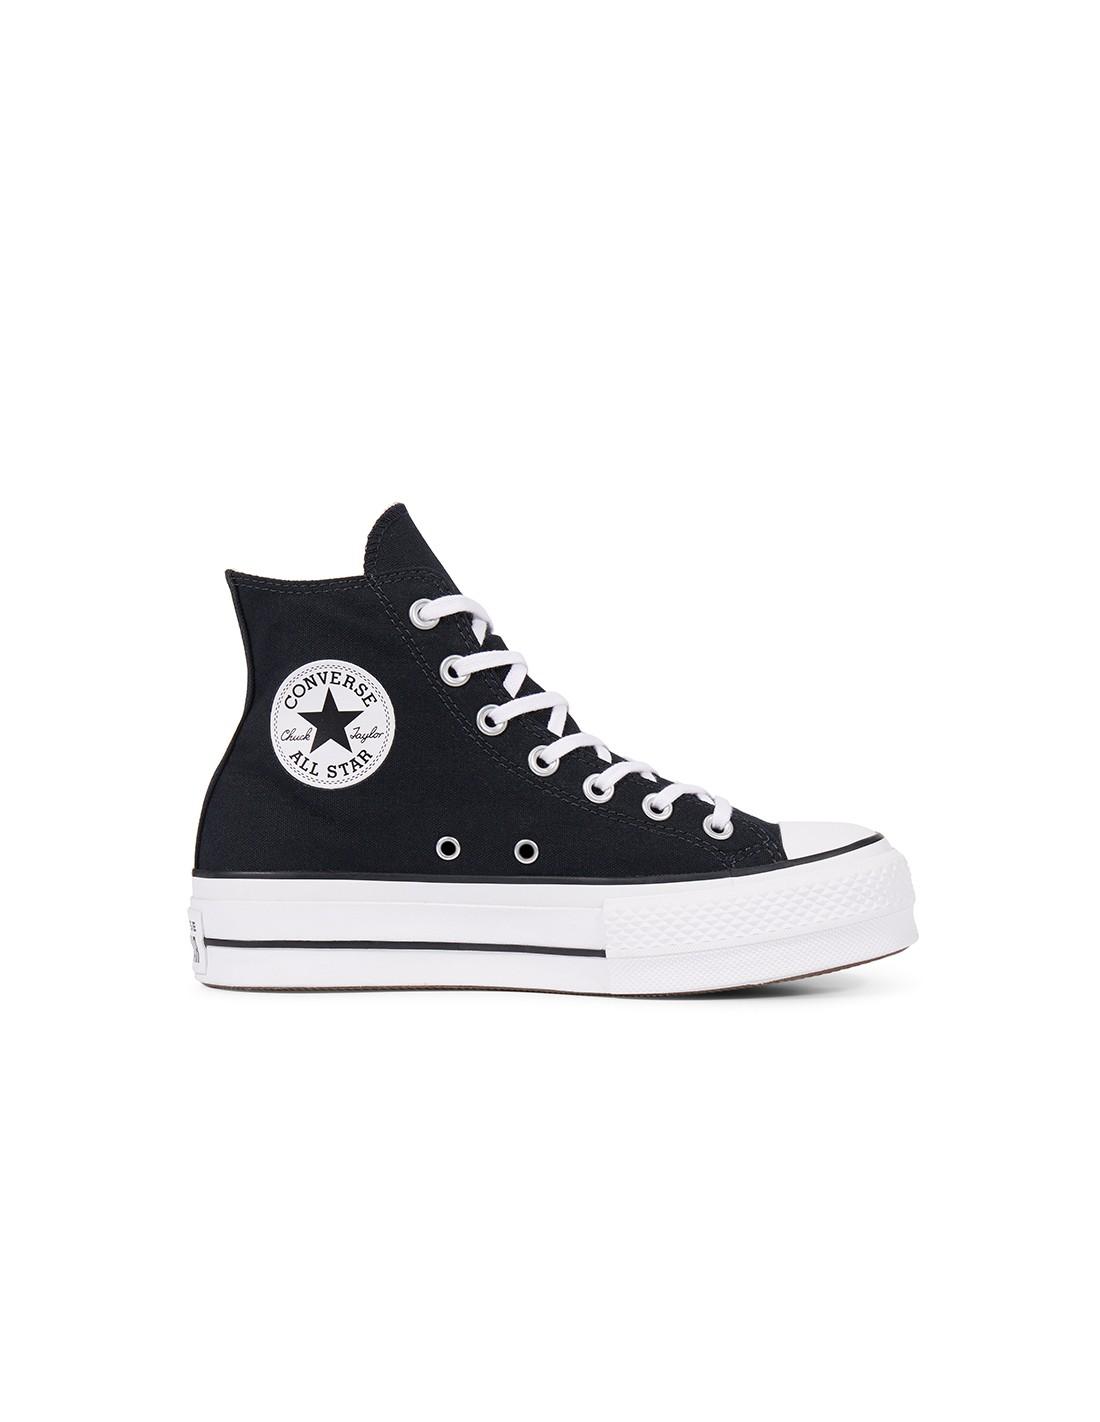 Converse Canvas All Star Lift High-top Flatform Trainers in Black White  (Black) - Save 16% | Lyst